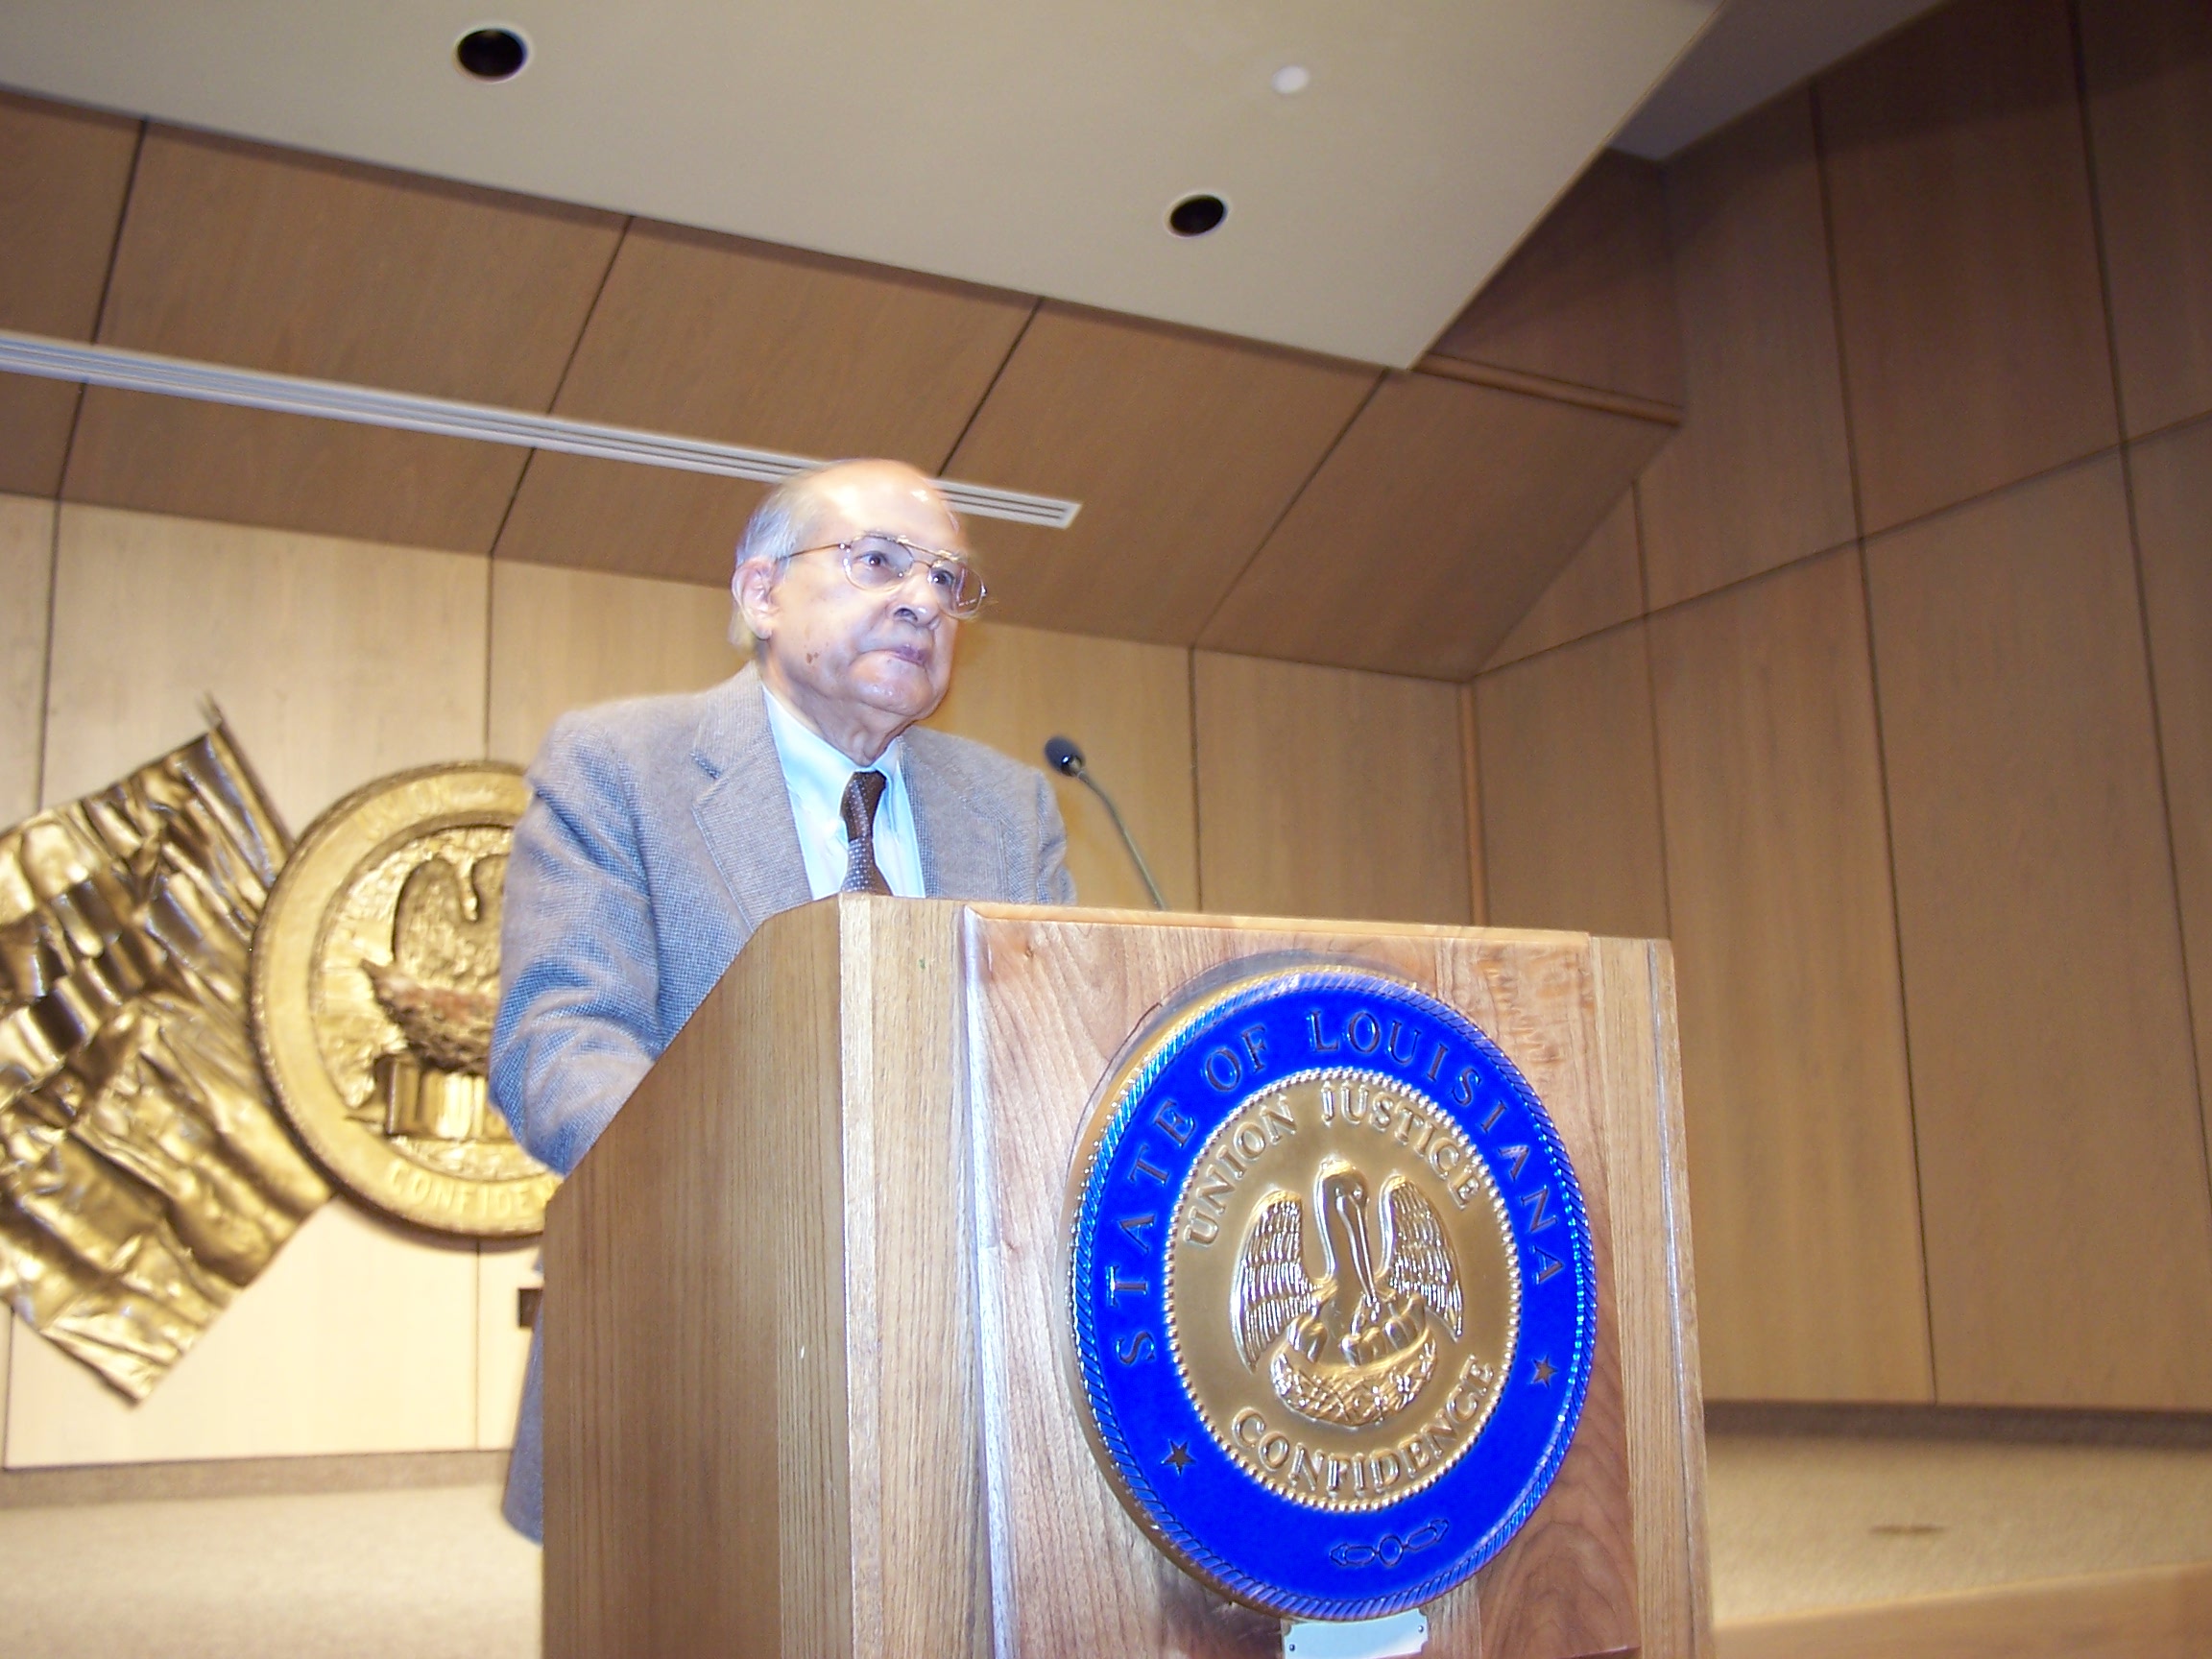 Dr. Din speaking at the March 2008 society meeting.